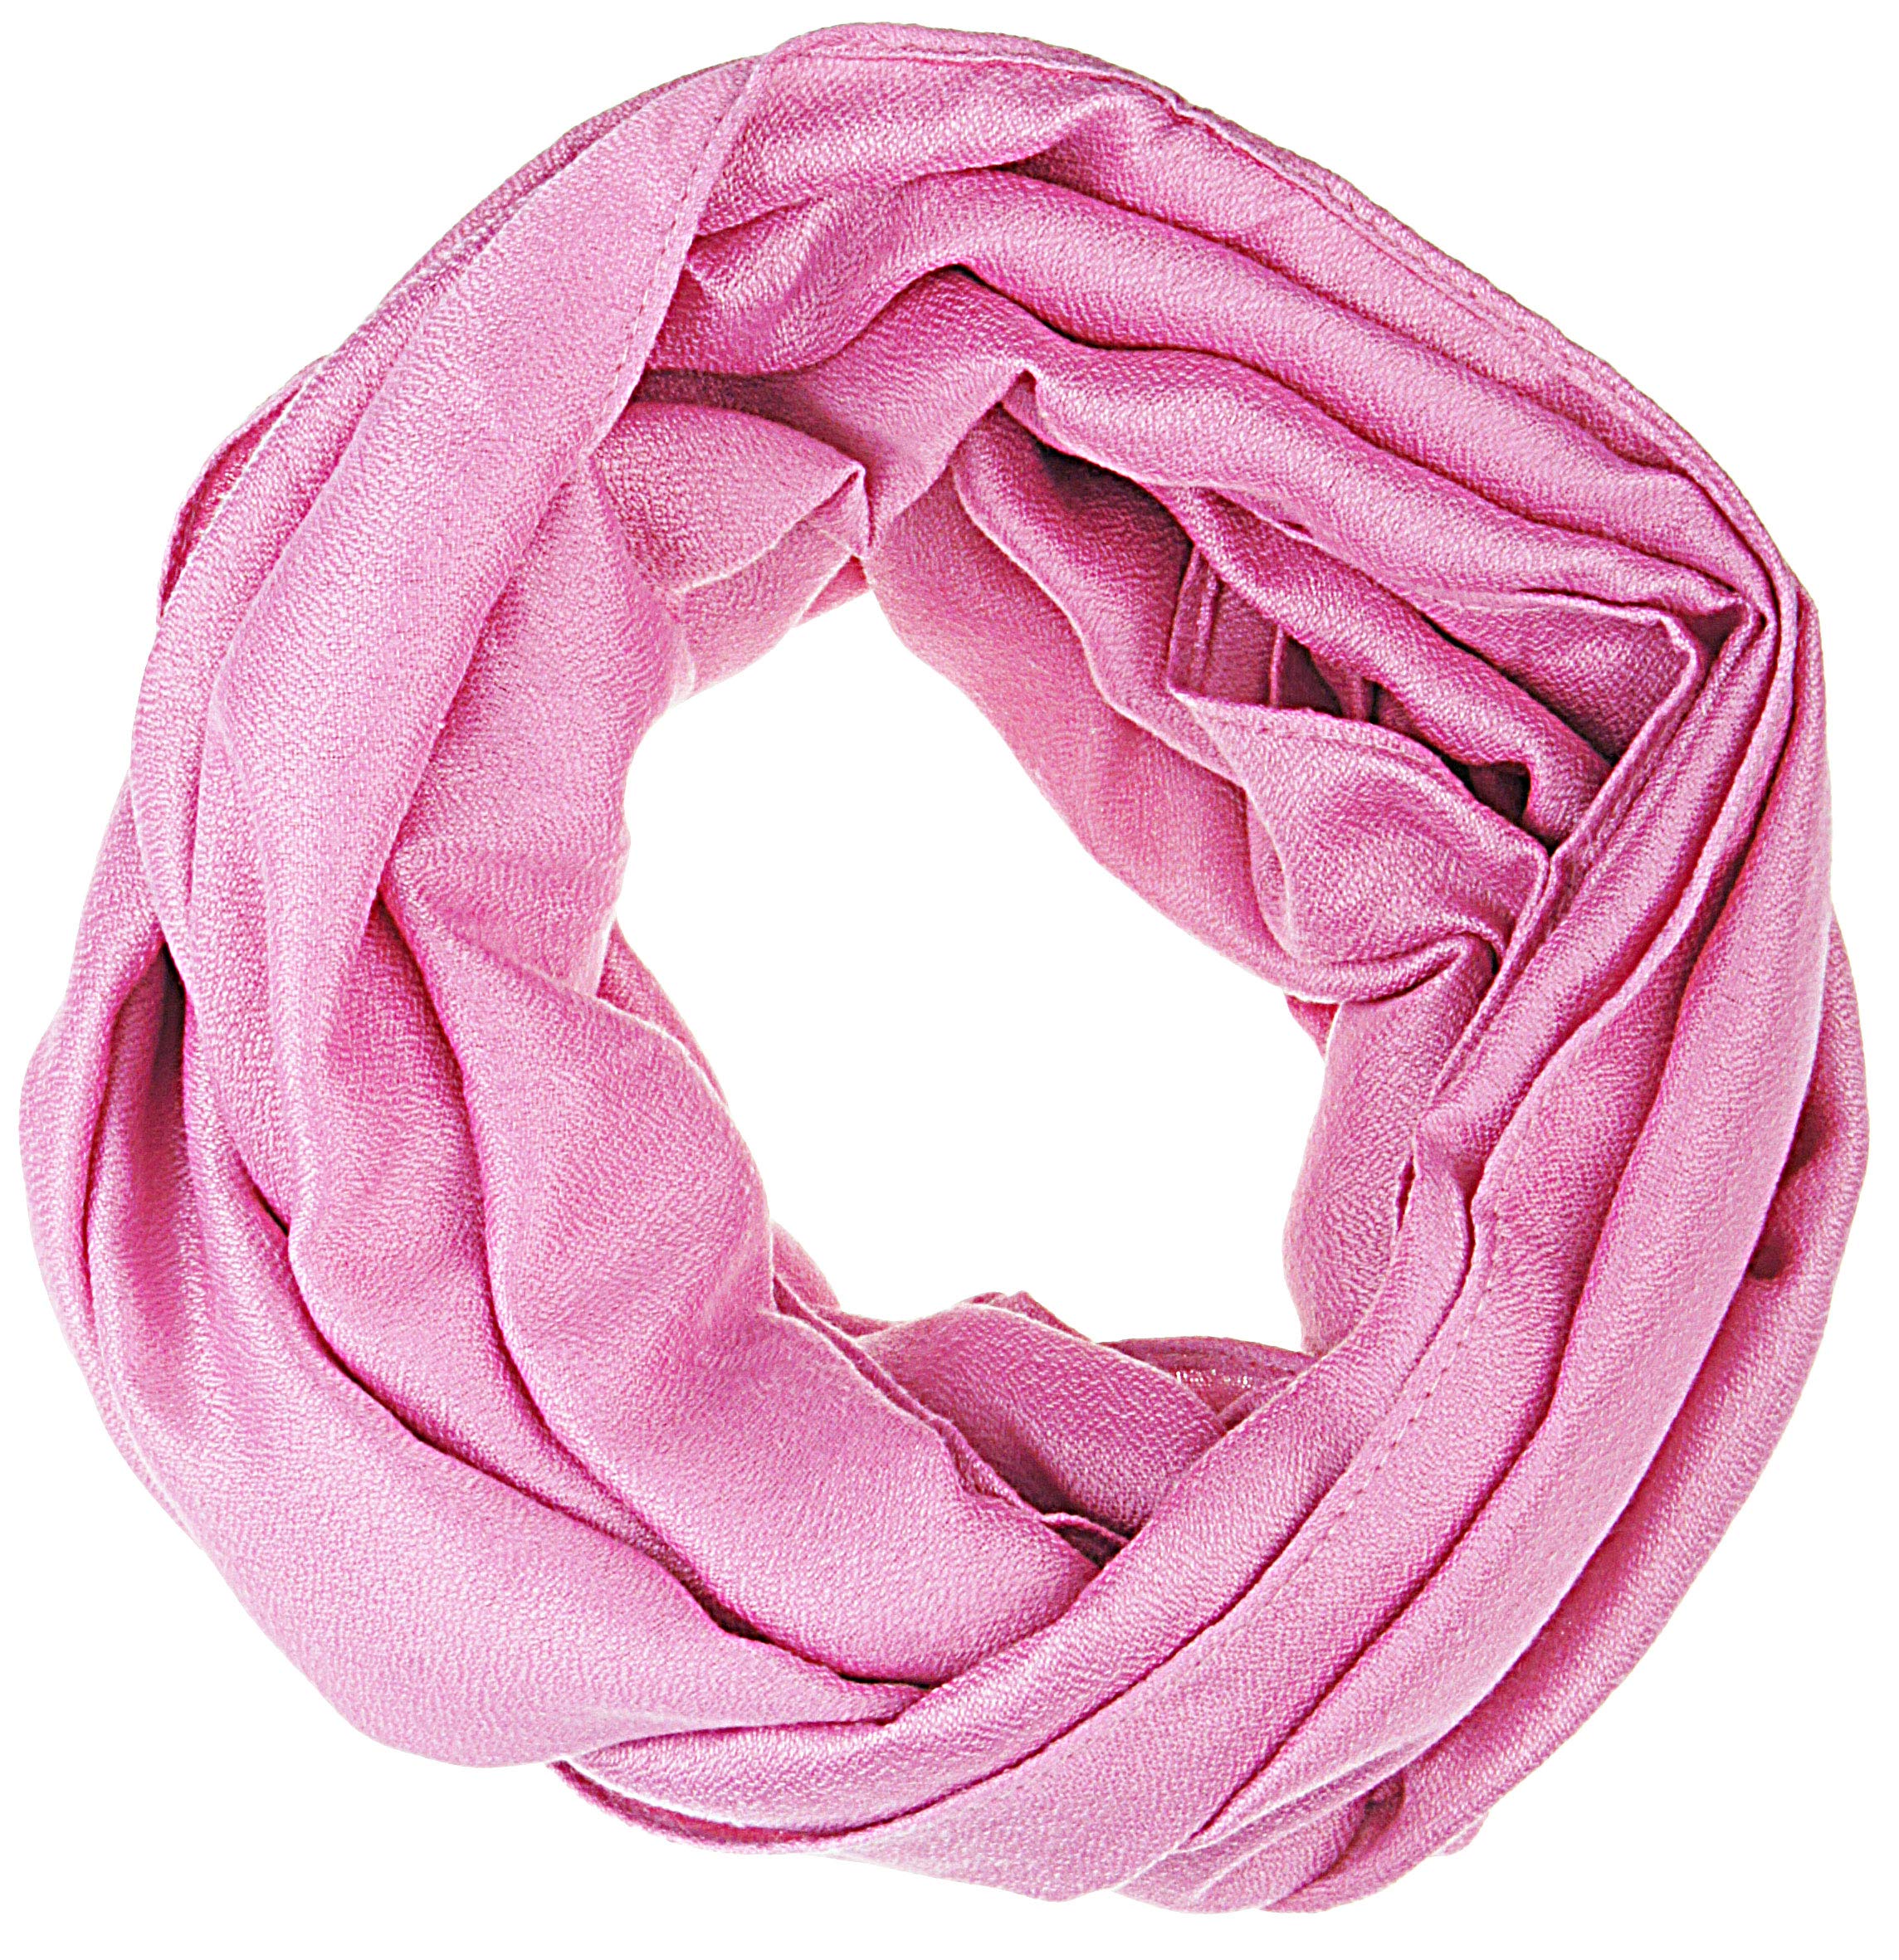 Premium Soft Light Weight Elegant Solid Color Satin Infinity Scarf